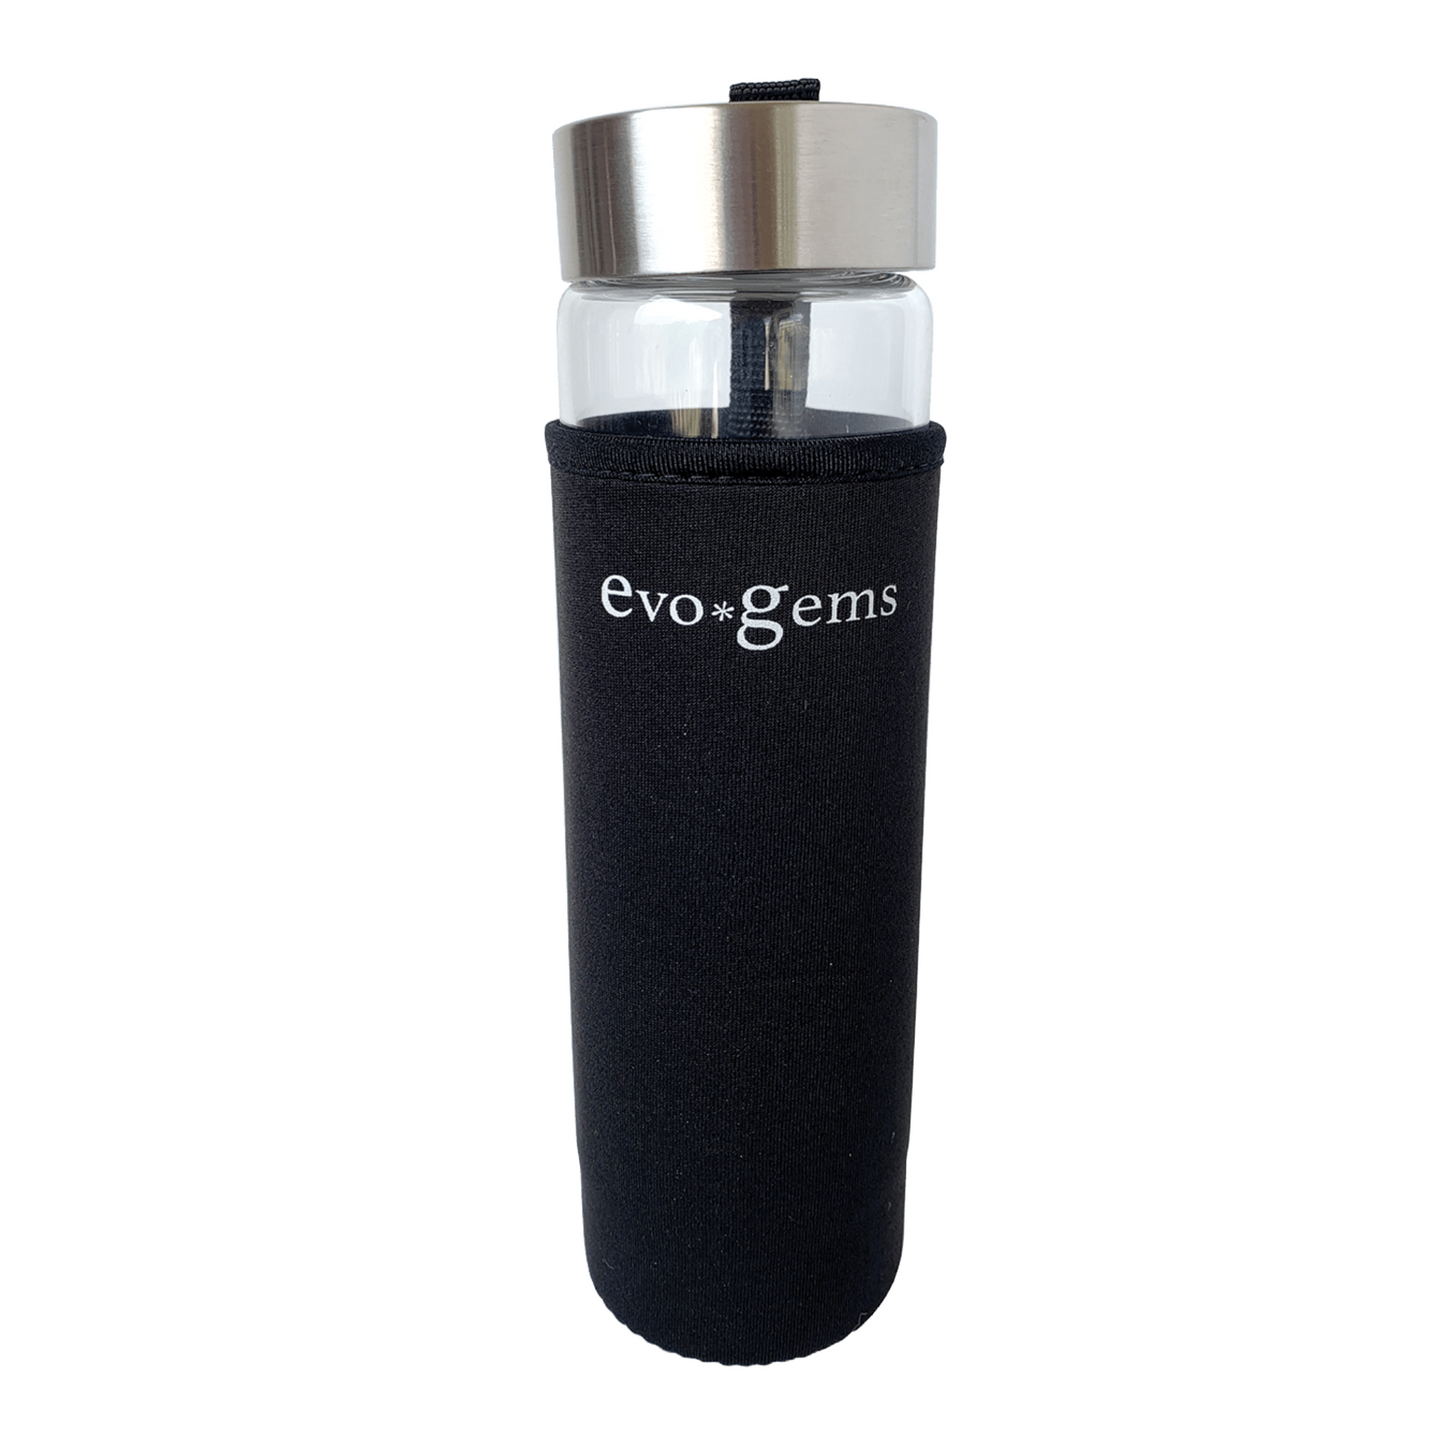 evo*gems Stainless Infusion Glass Bottle